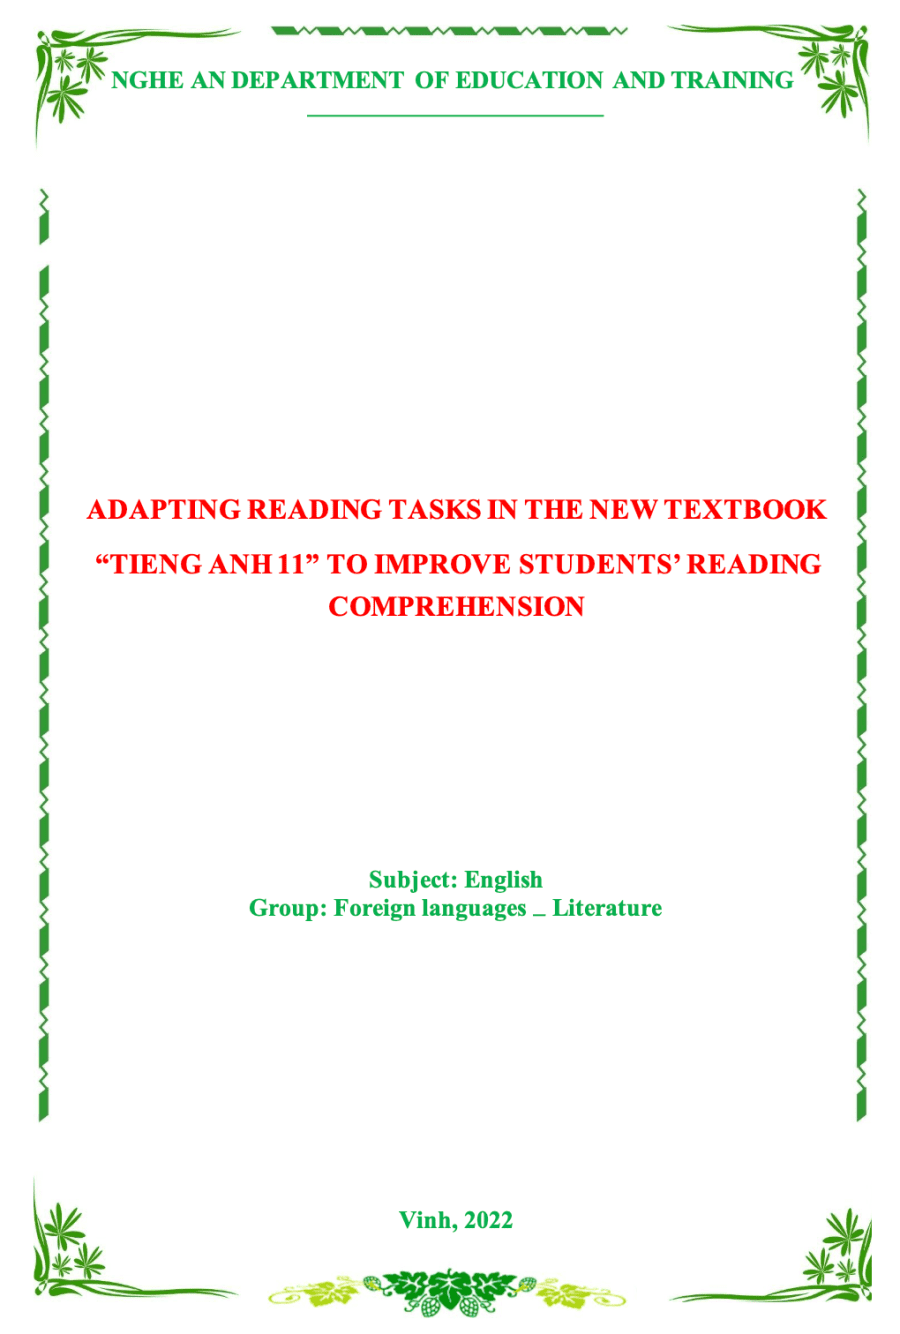 SKKN Adapting reading tasks in the new textbook “Tieng Anh 11” to improve students’ reading comprehension